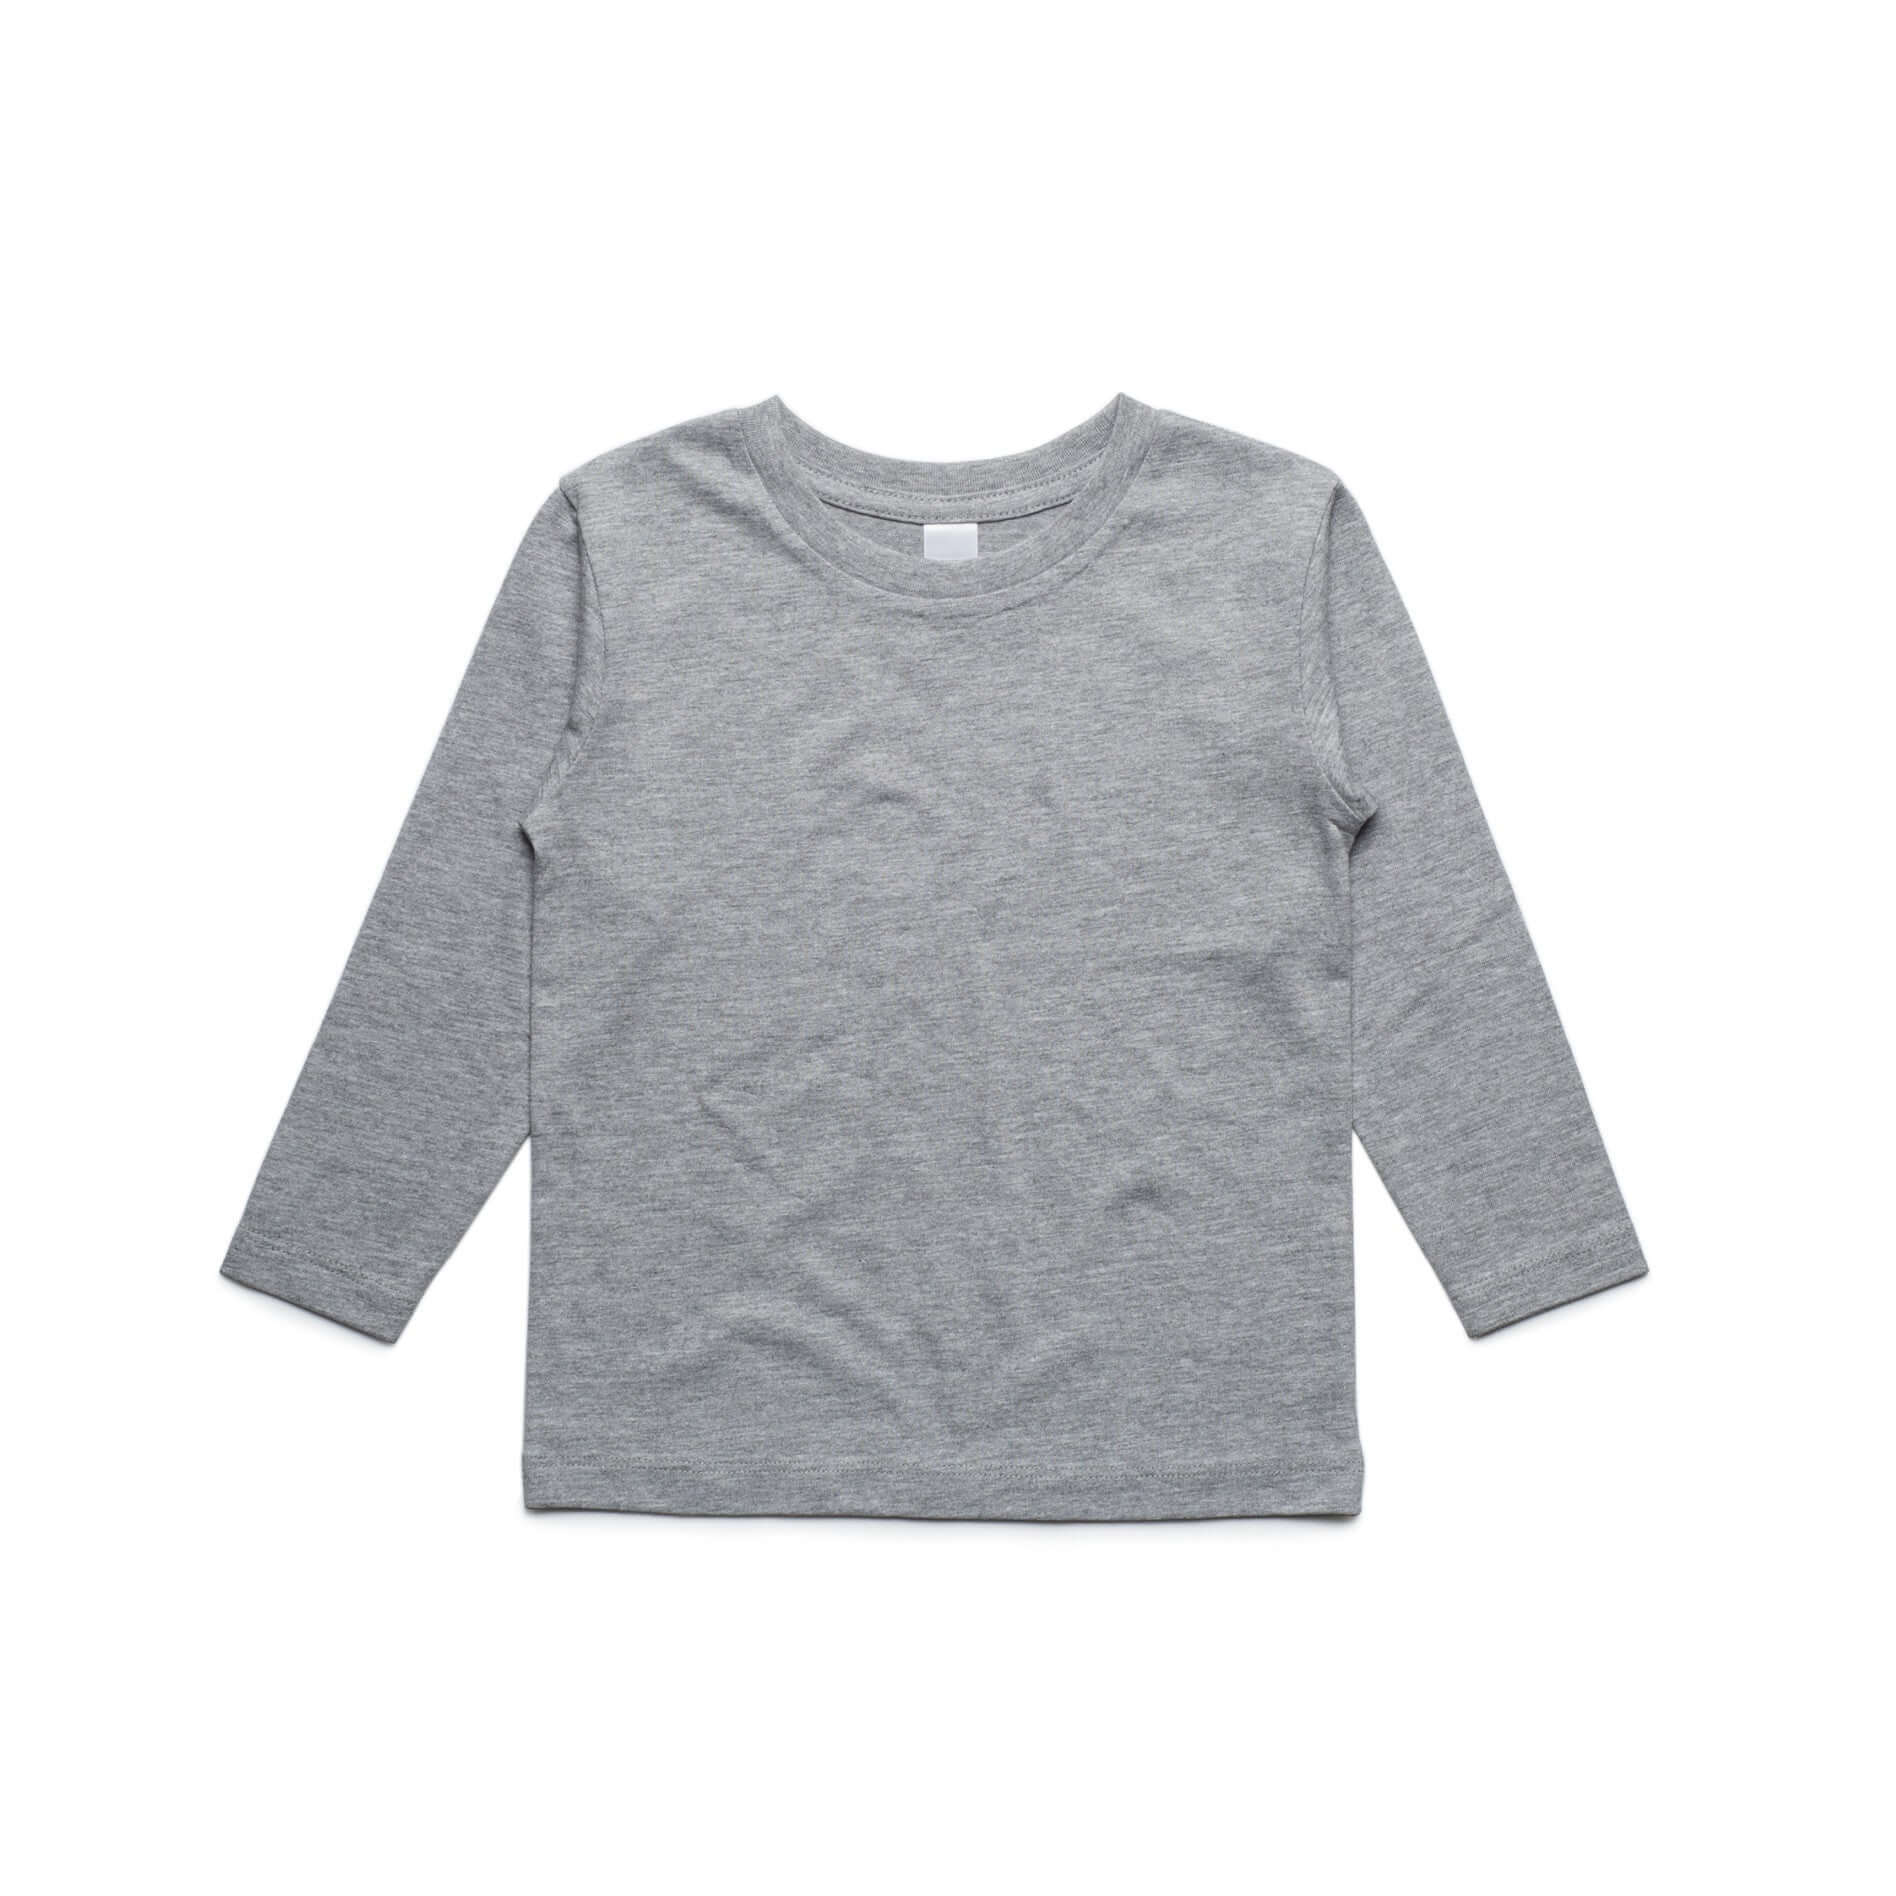 AS Colour Kids Cotton Long Sleeve Basic Tee Shirt White, Black and Grey Marl - Frankie's Story - 3